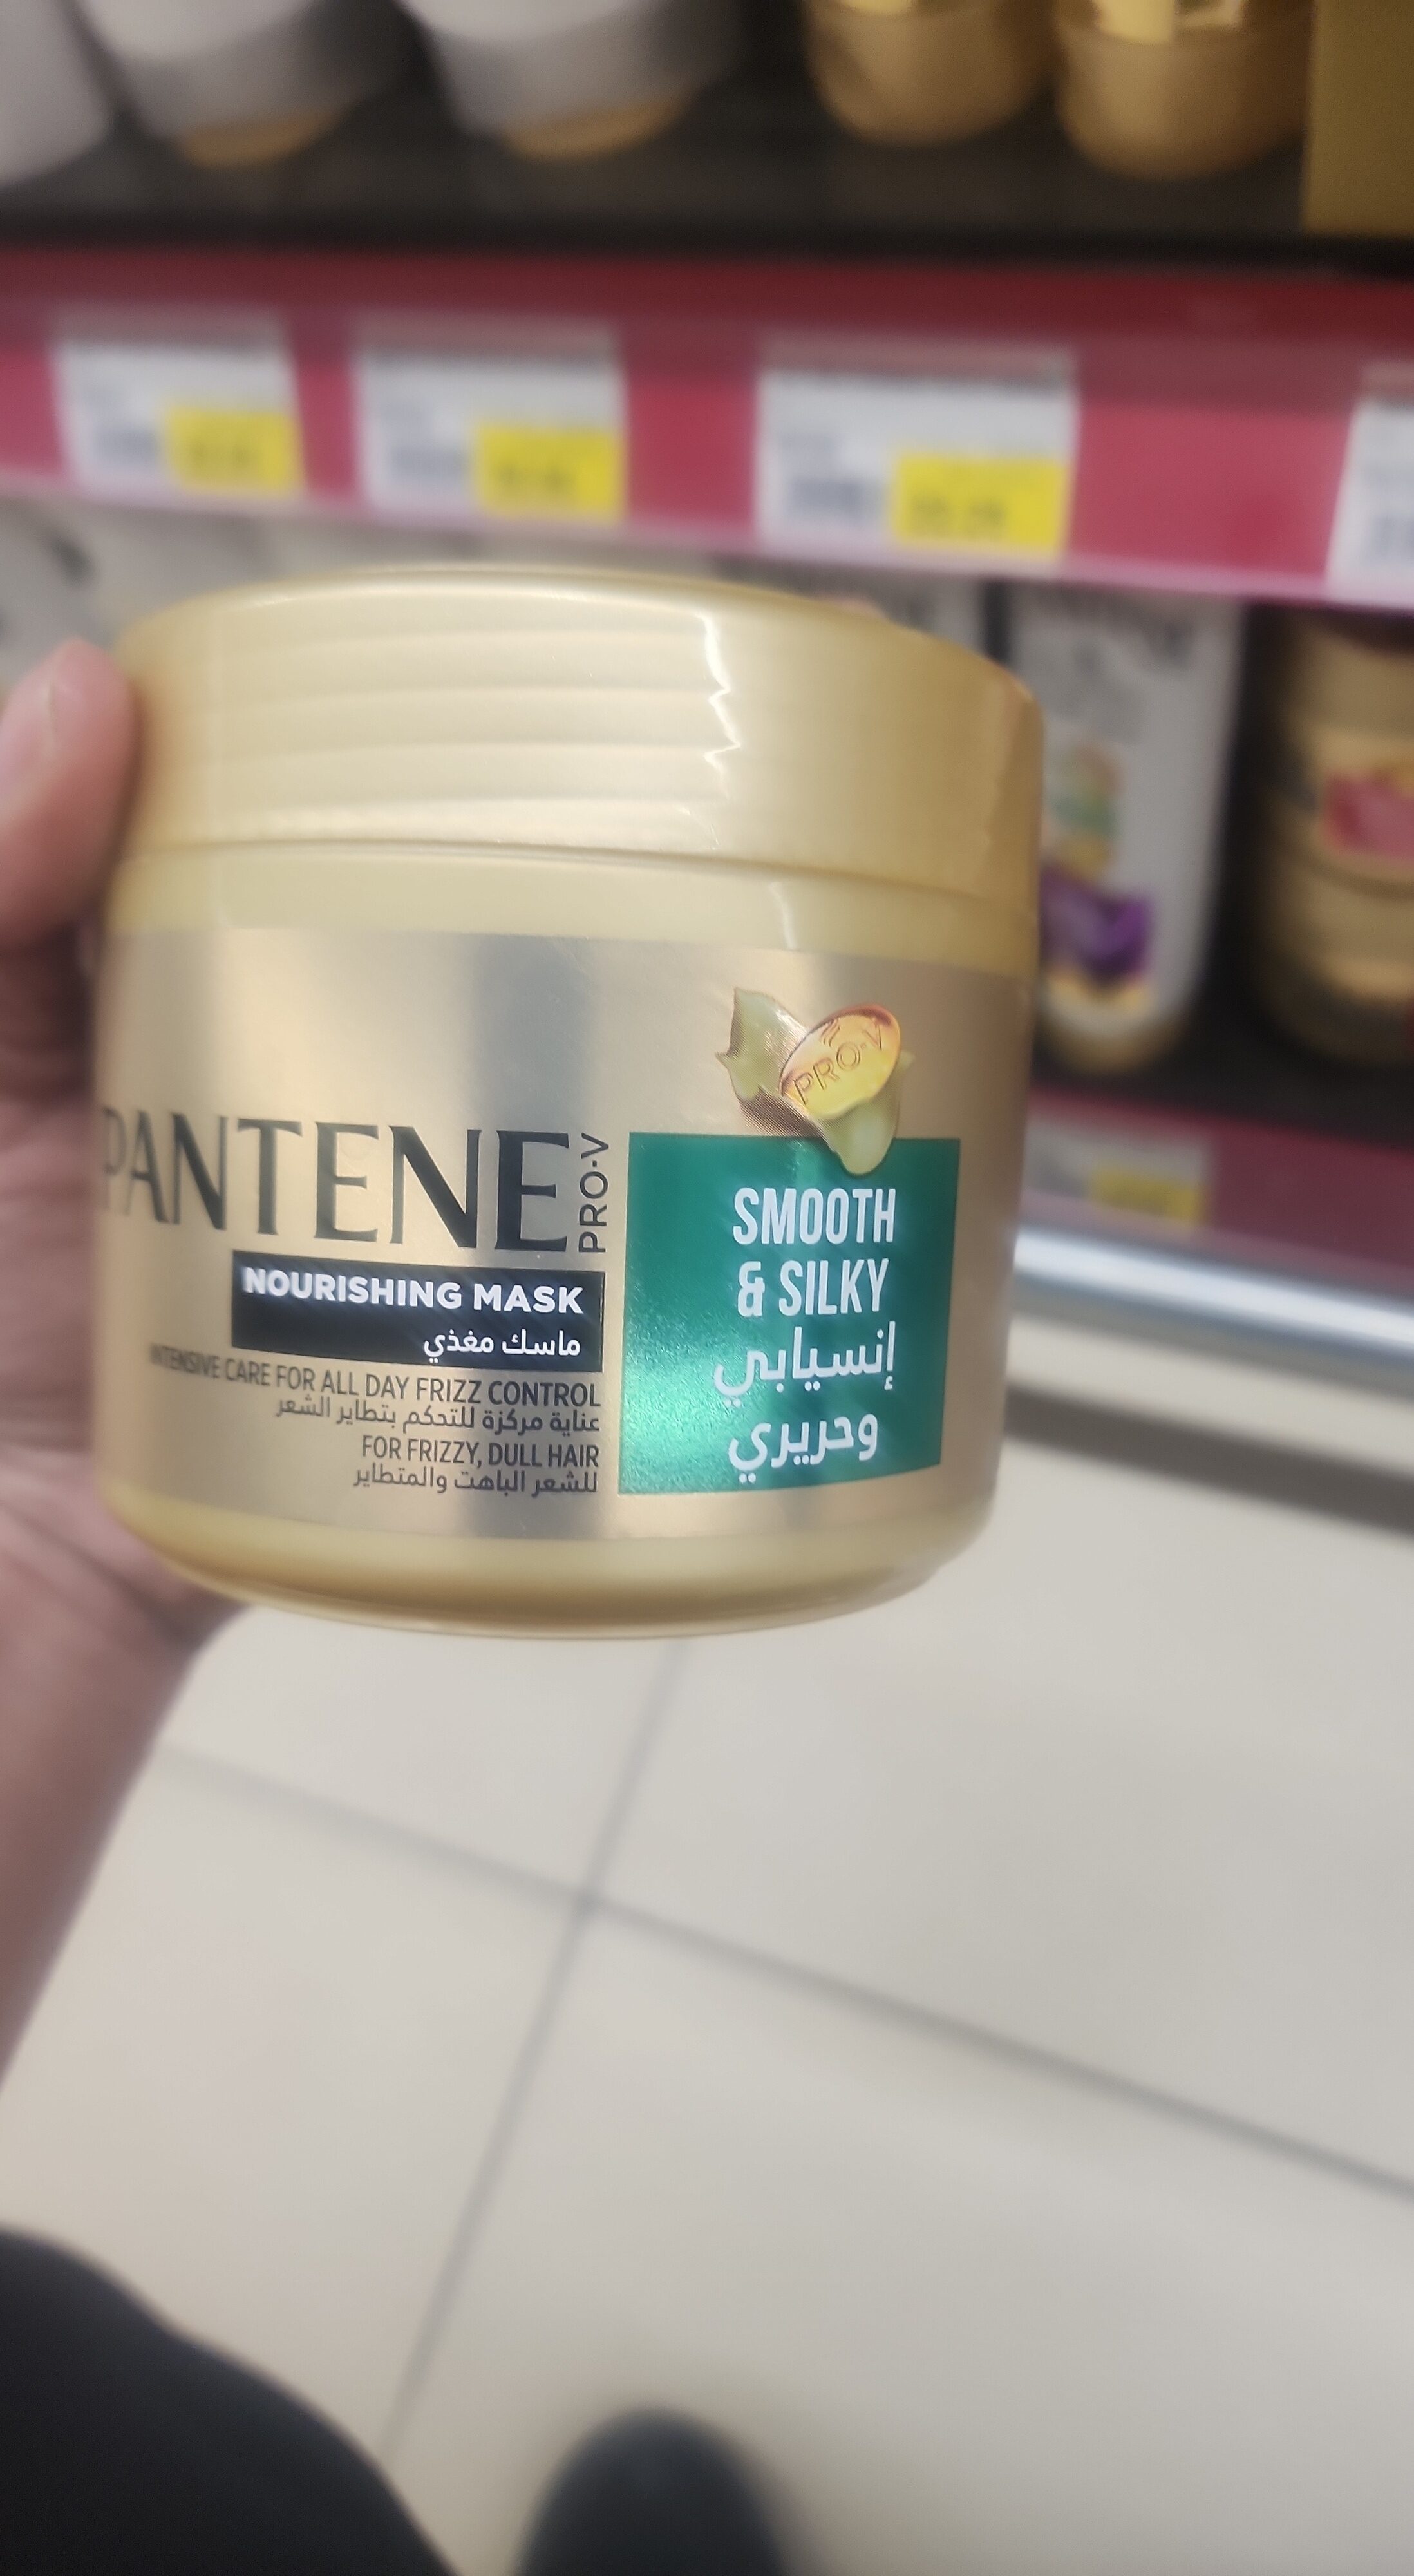 Smooth and silky mask - 製品 - en